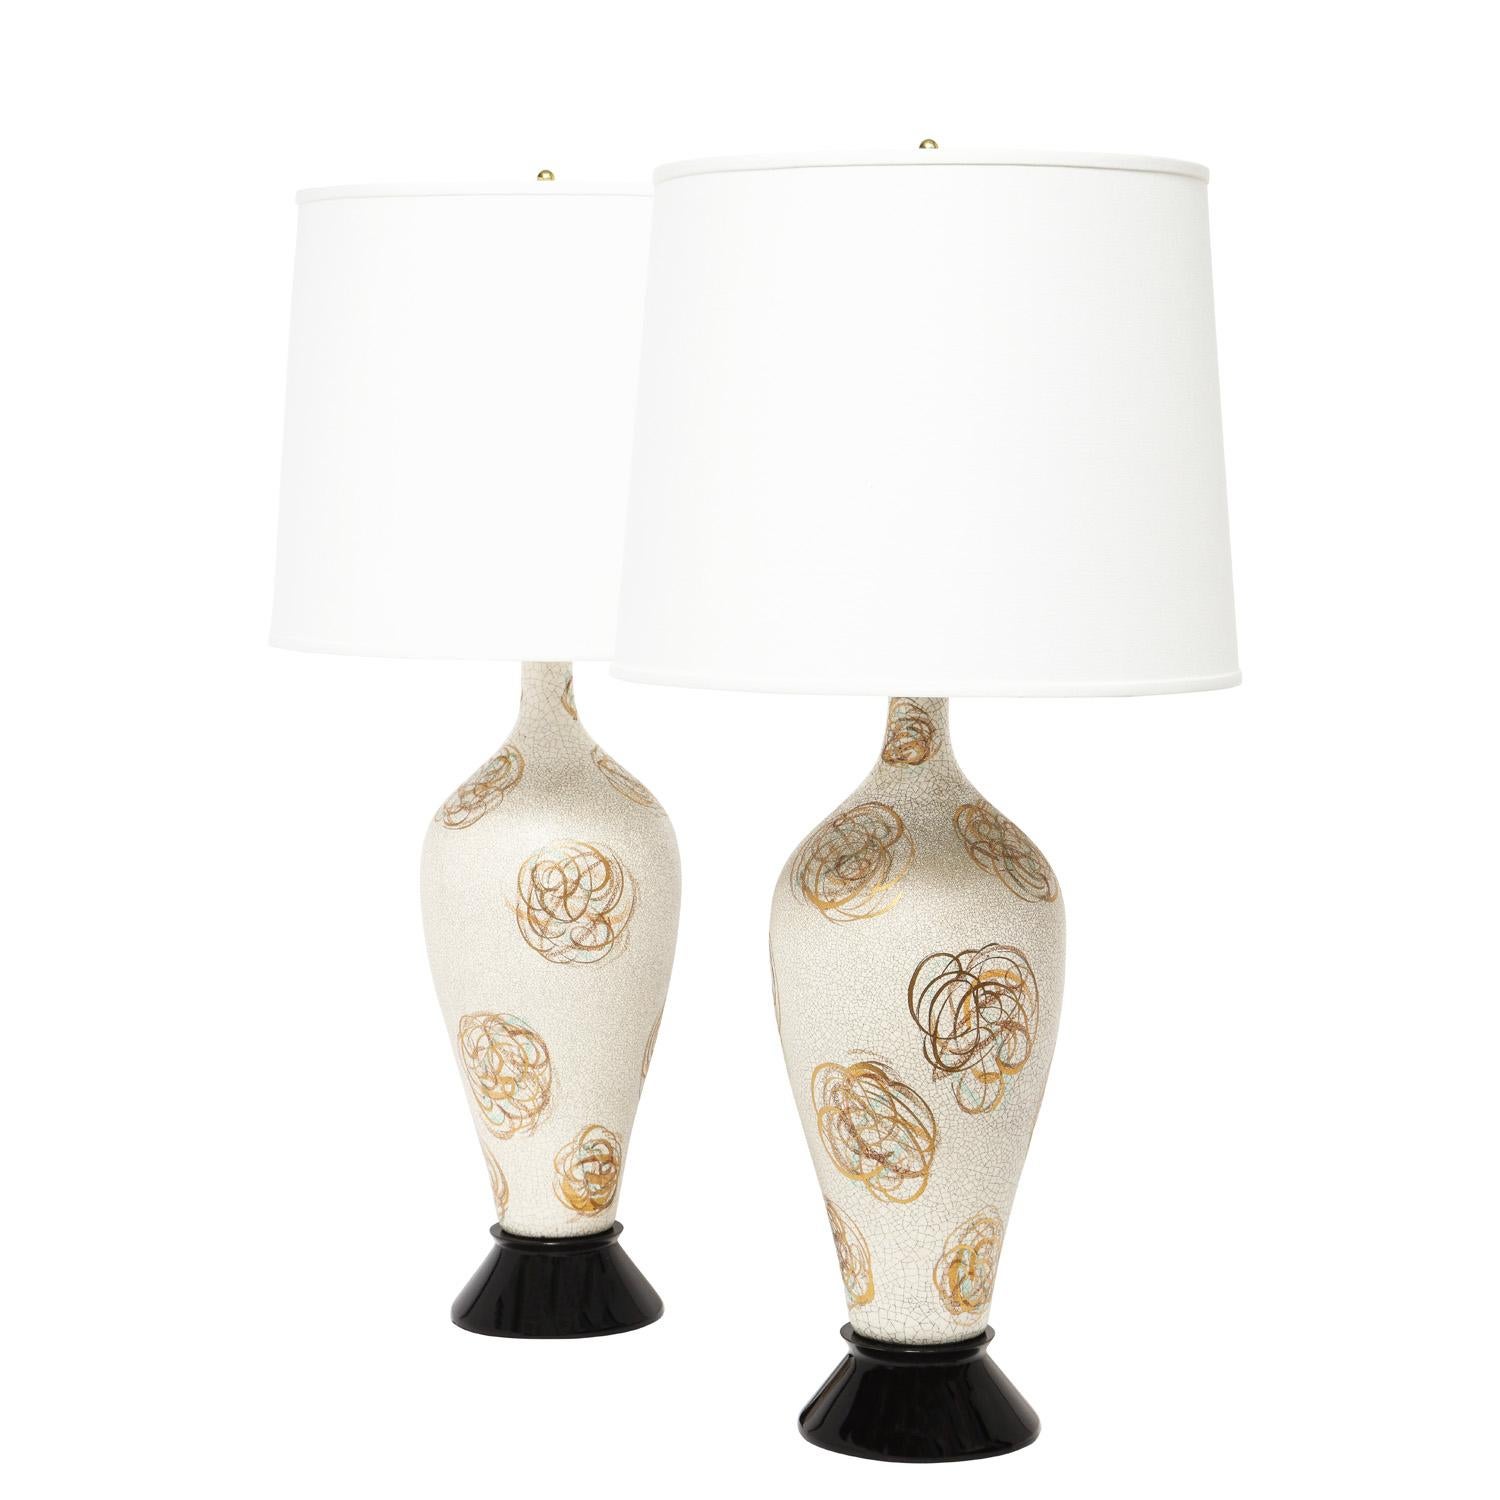 Pair of artisan table lamps, gray speckled glaze with abstract gold flowers on ebonized bases and brass hardware, American 1950's. The colors and glaze on these lamps are simply beautiful. Bases have been newly refinished and lamps have been